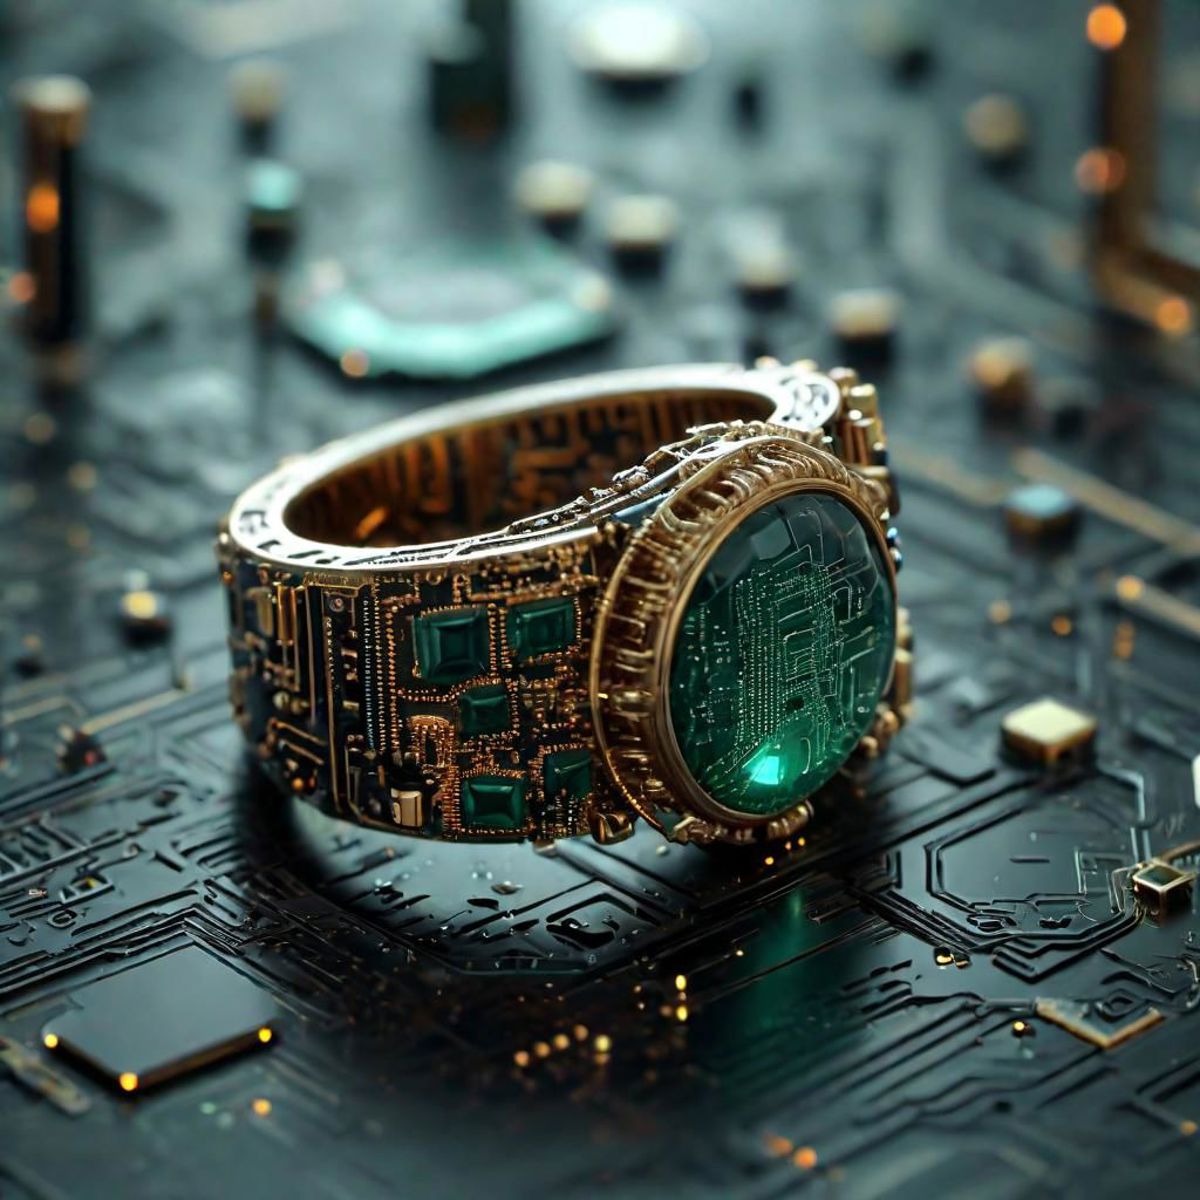 Dark Futuristic Circuit Boards image by Spizzy